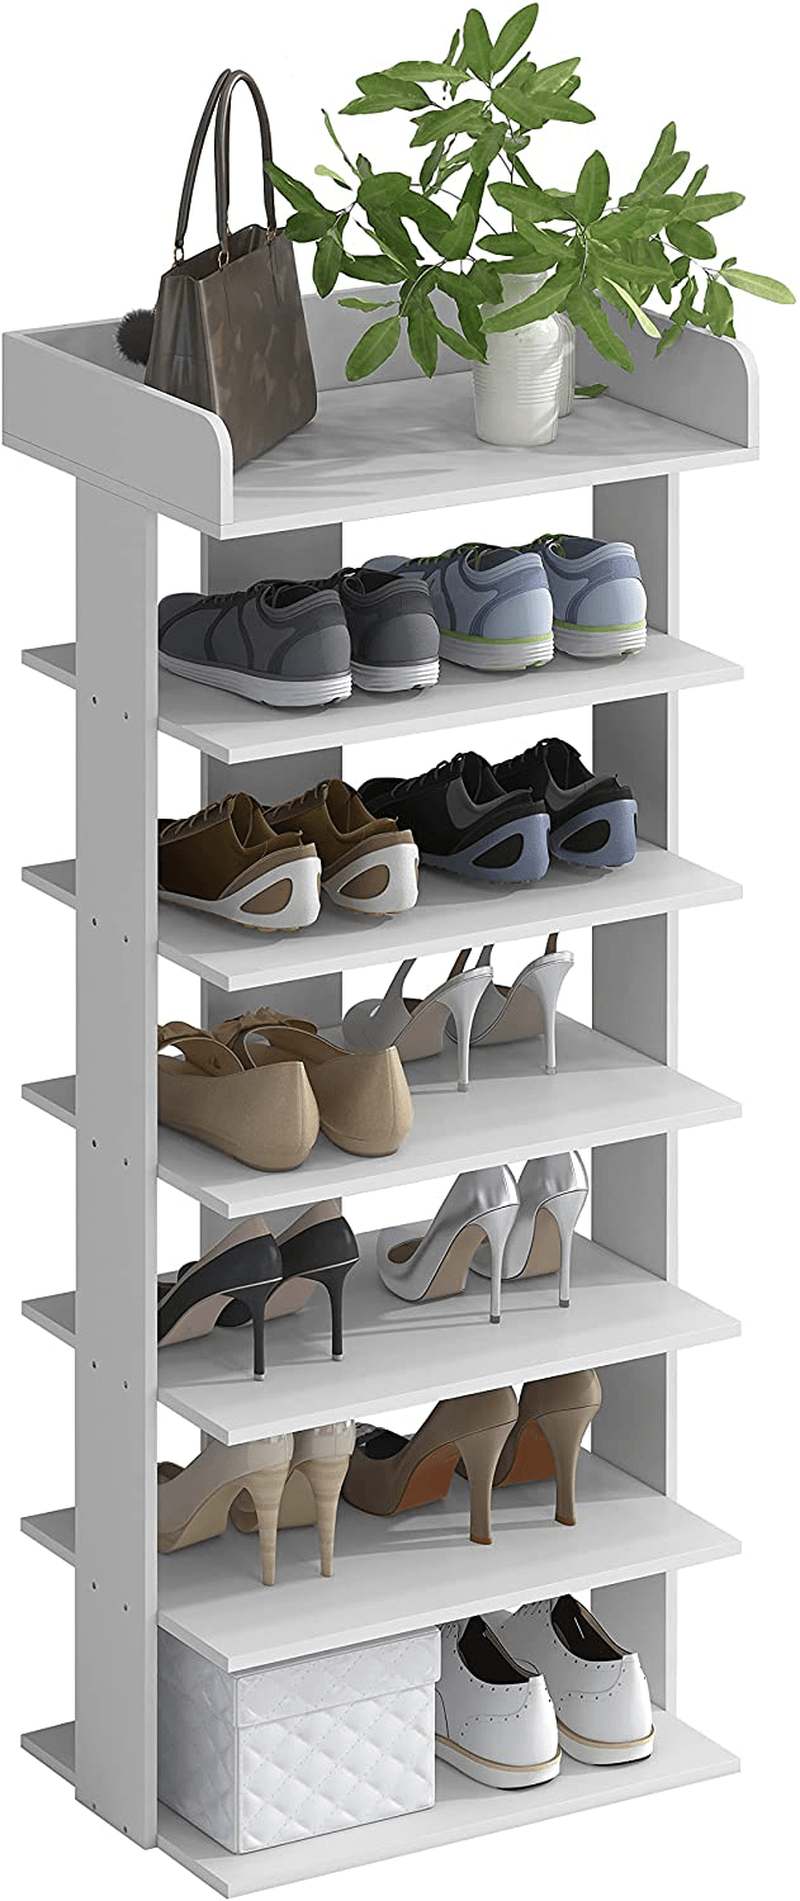 4NM 6 Tiers Wooden Shoes Racks, Vertical Shoe Rack for Entryway, Shoes Storage Stand, Home Storage Shelf Organizer, Fits 12 Pairs of Shoes (White) Furniture > Cabinets & Storage > Armoires & Wardrobes 4NM White 6-Tier 